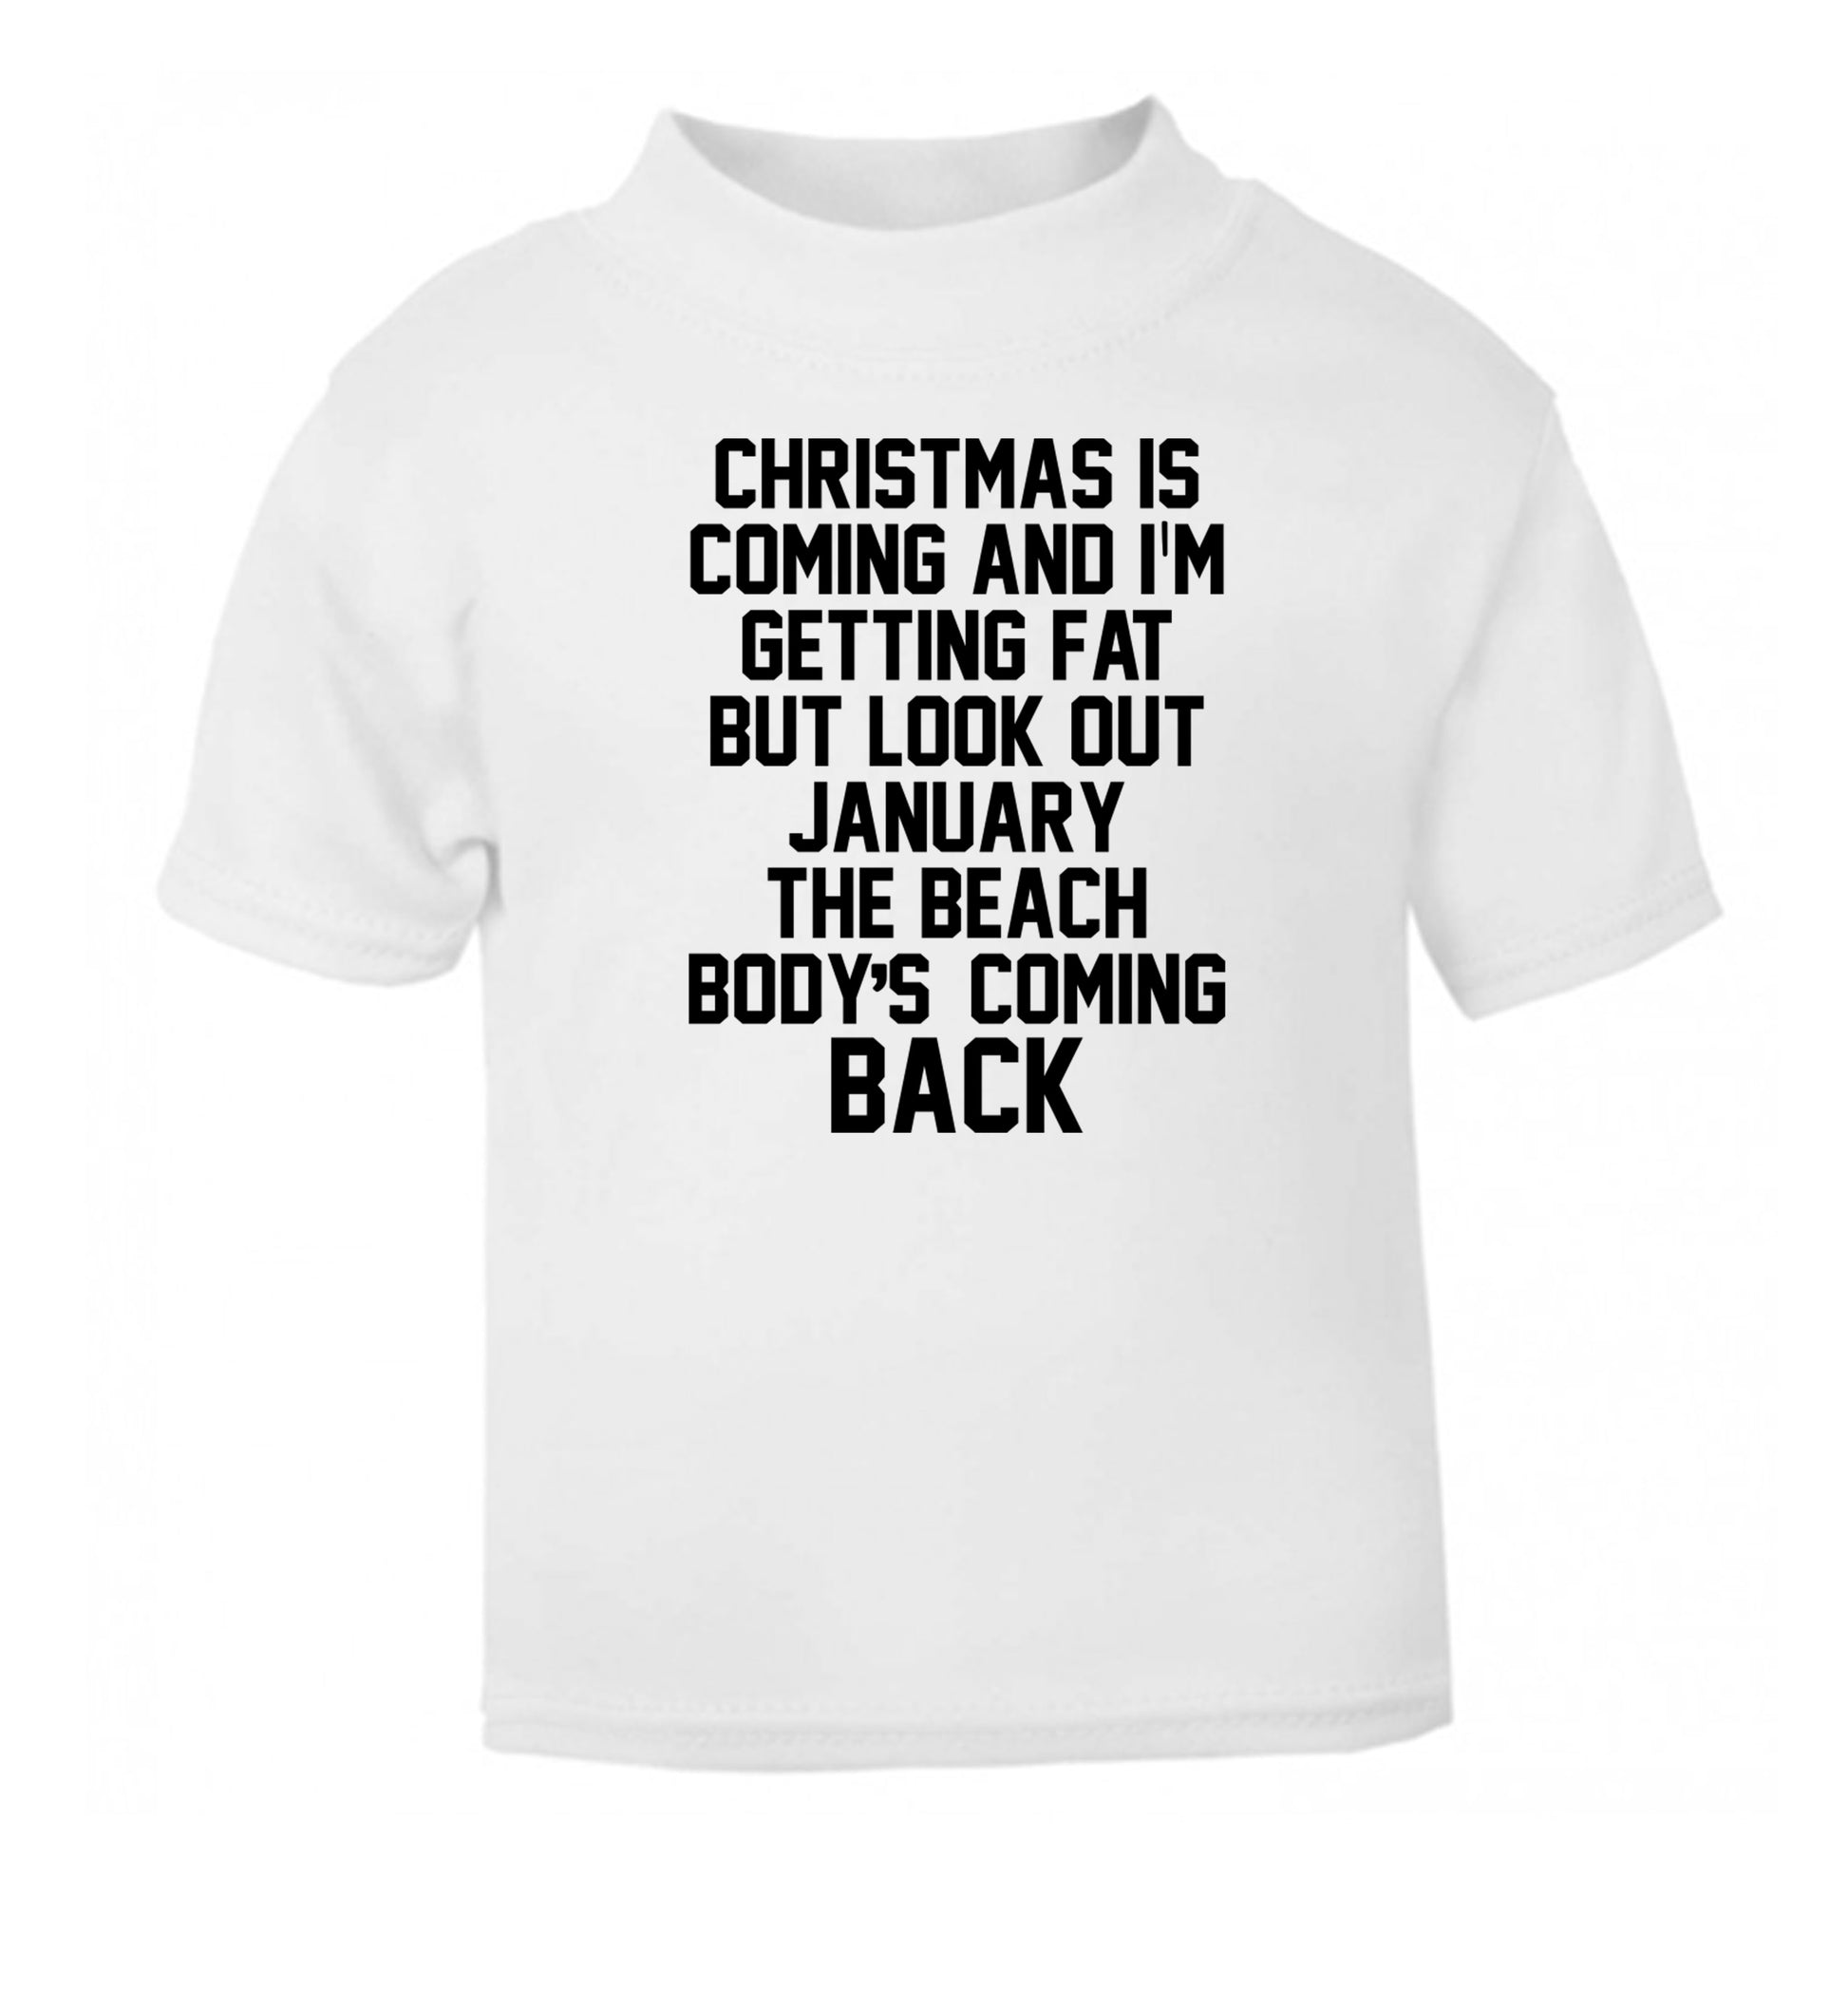 Christmas is coming and I'm getting fat but look out January the beach body's coming back! white Baby Toddler Tshirt 2 Years